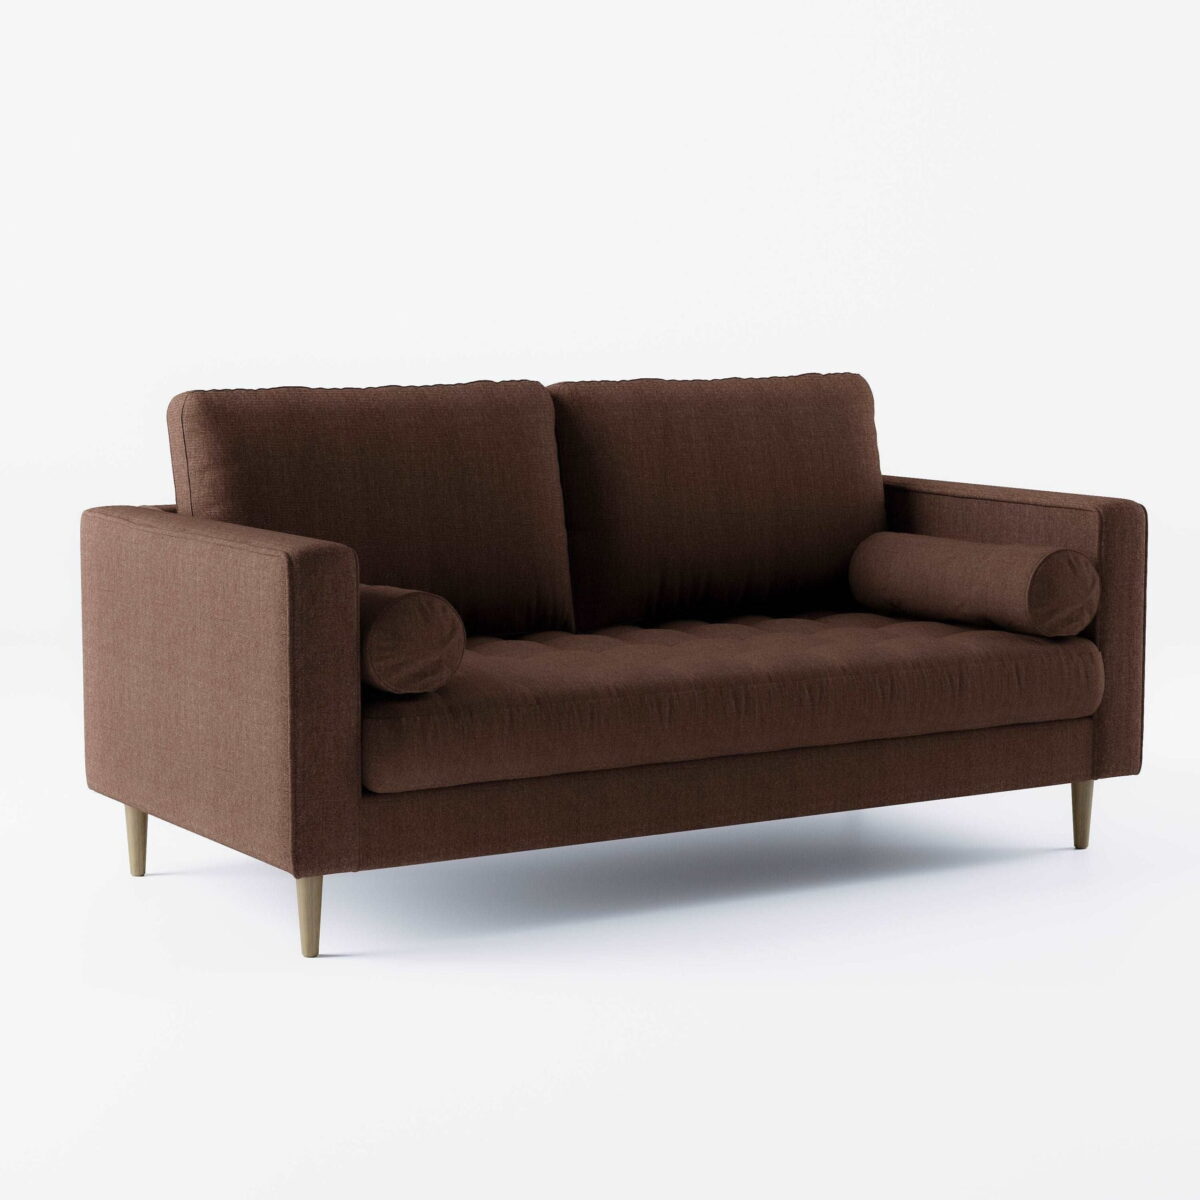 City Chic: Urban Escape with a Trendy 2-Seater Sofa